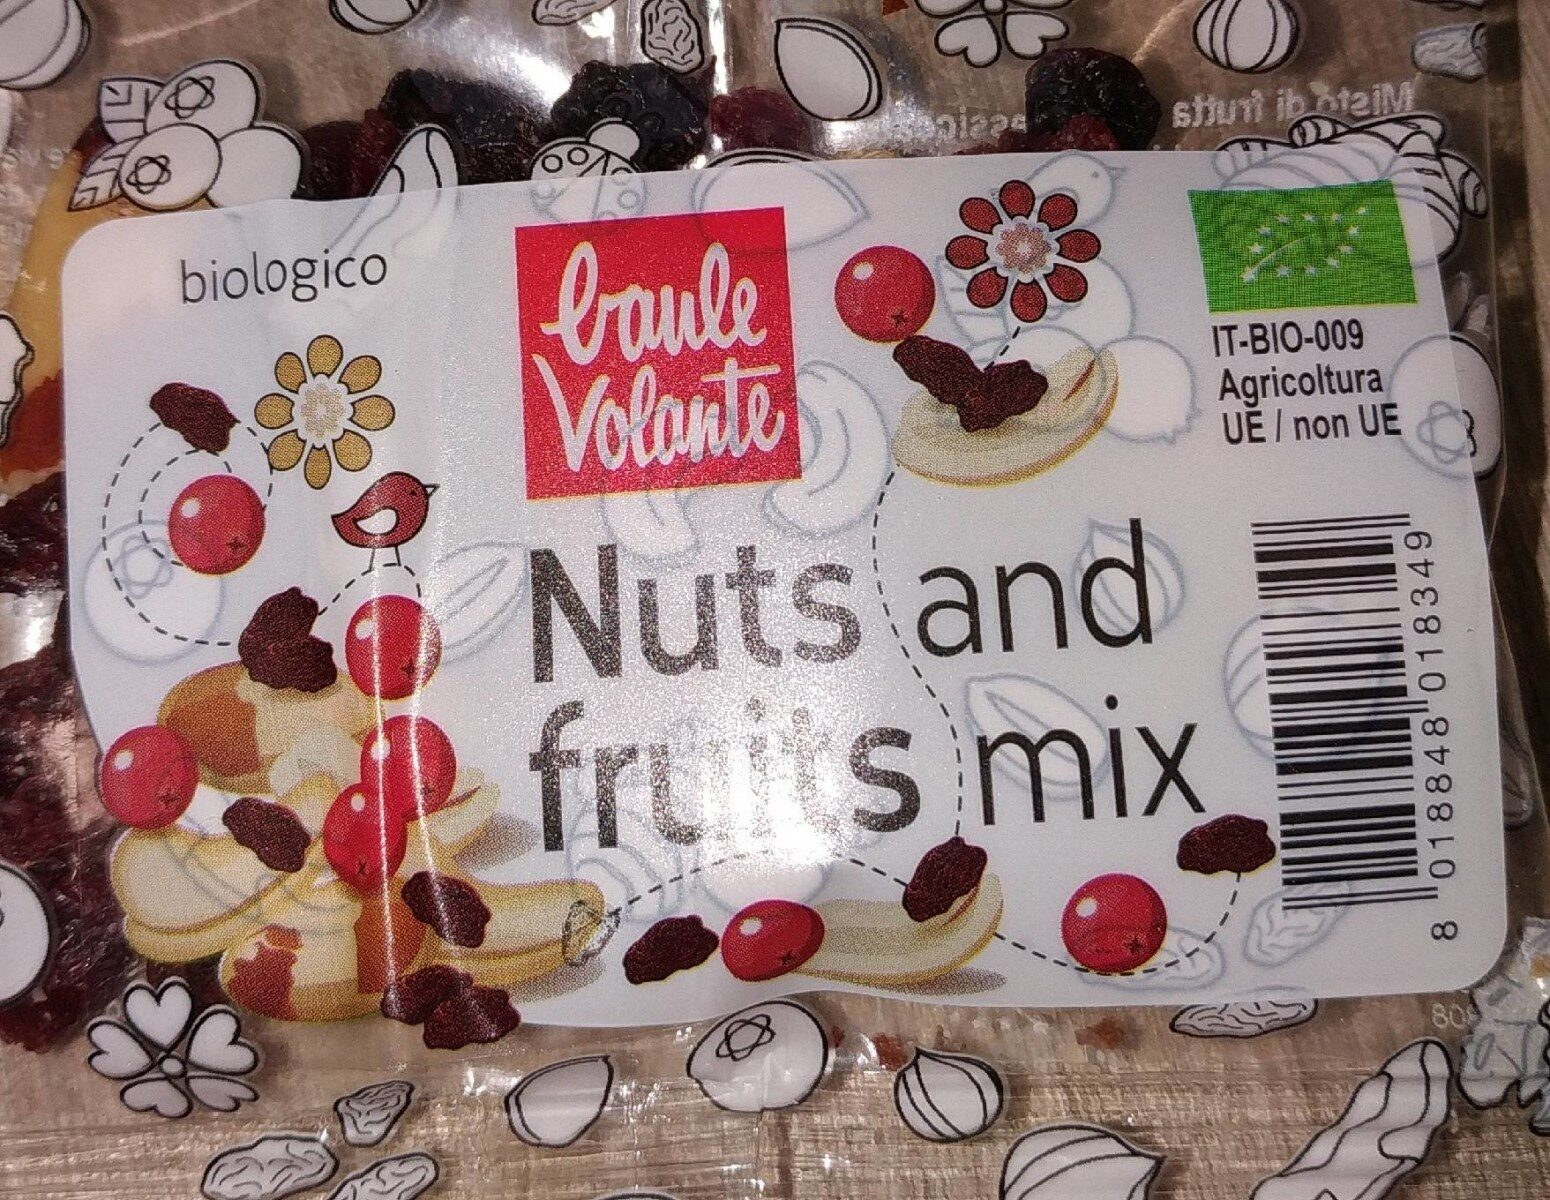 Nuts and fruits mix - Prodotto